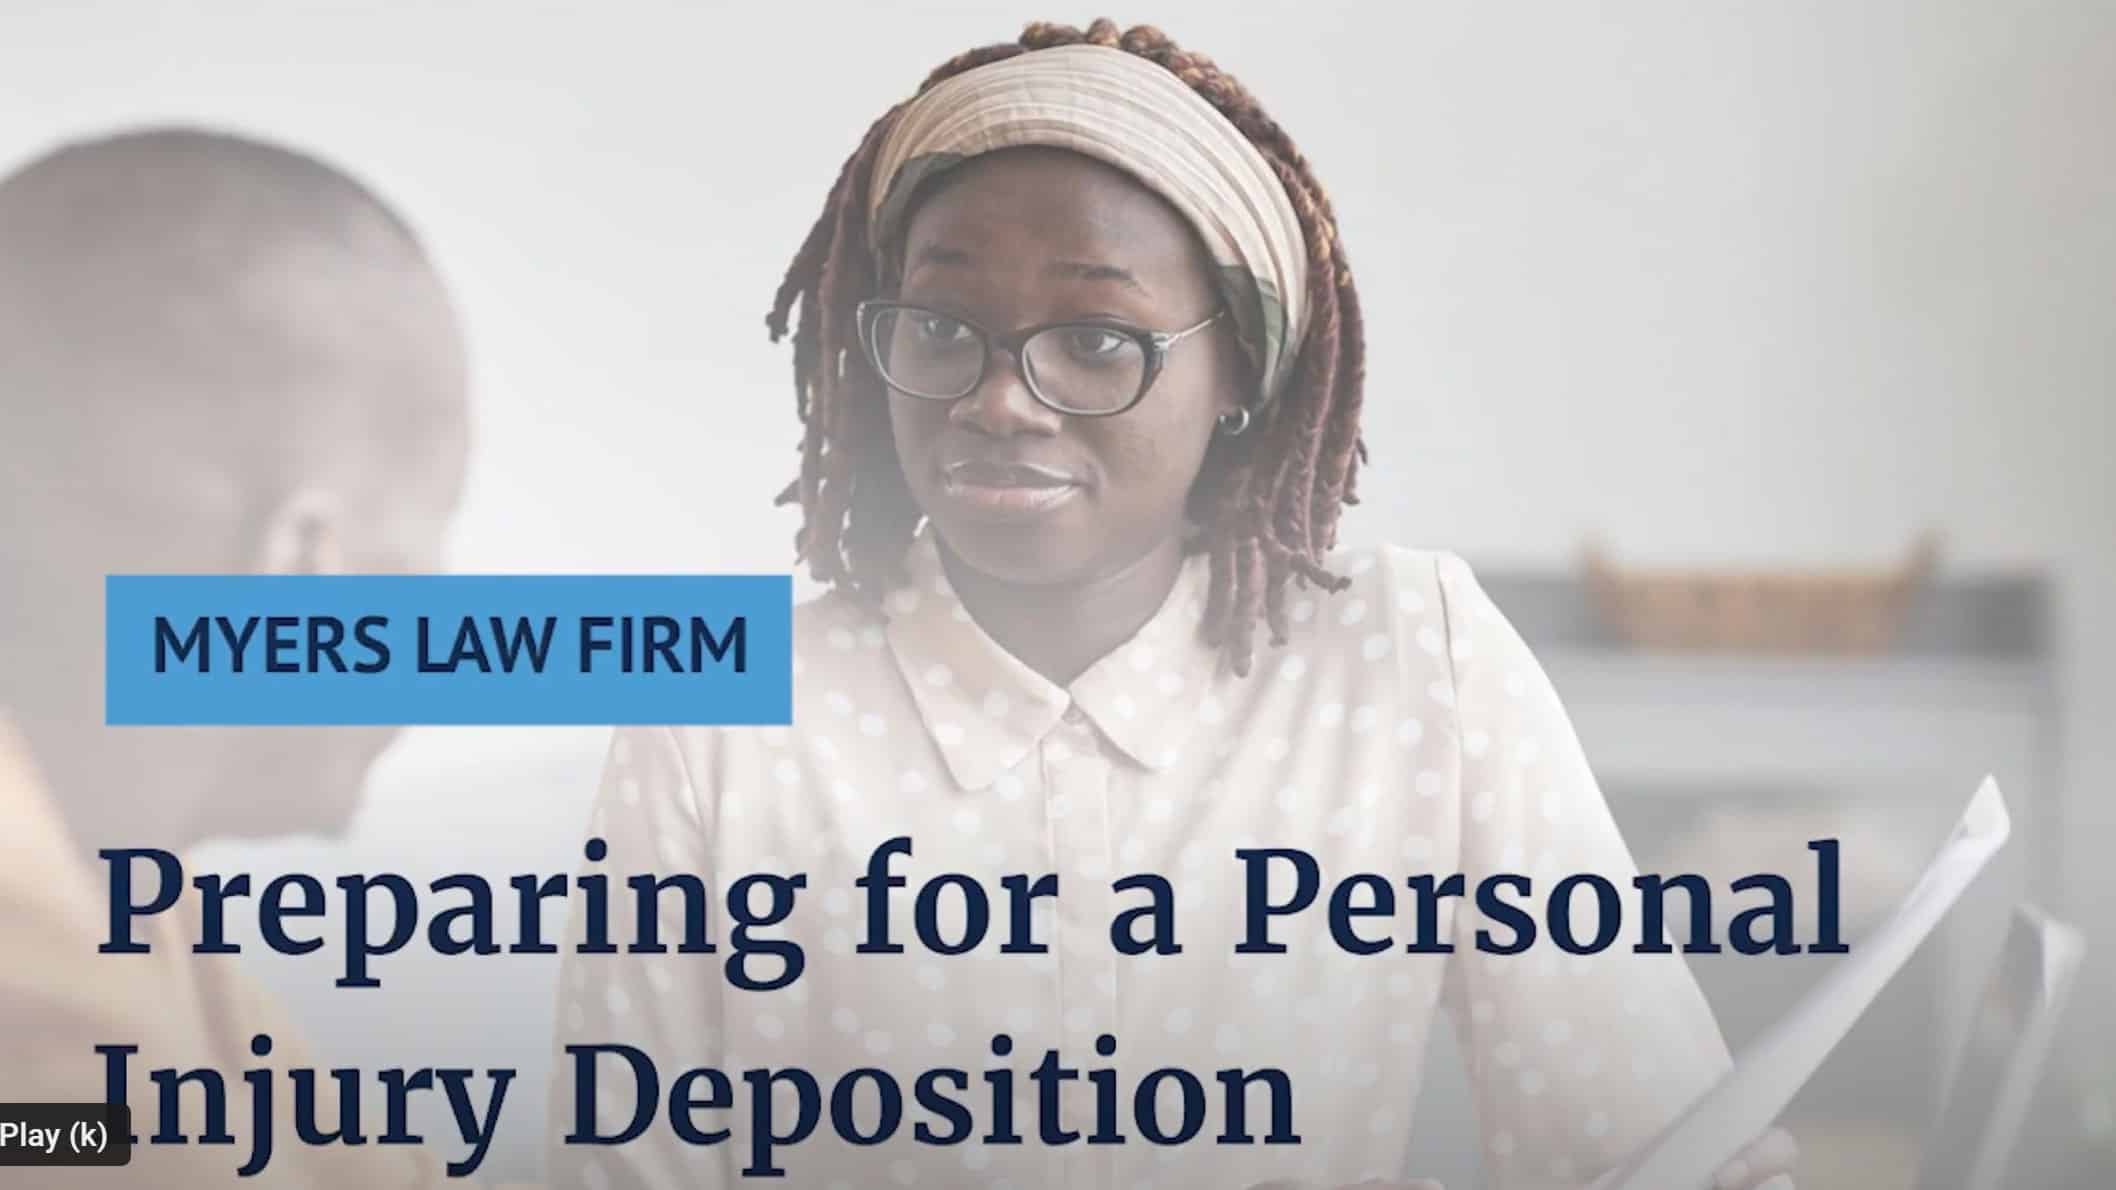 Personal Injury Deposition Video